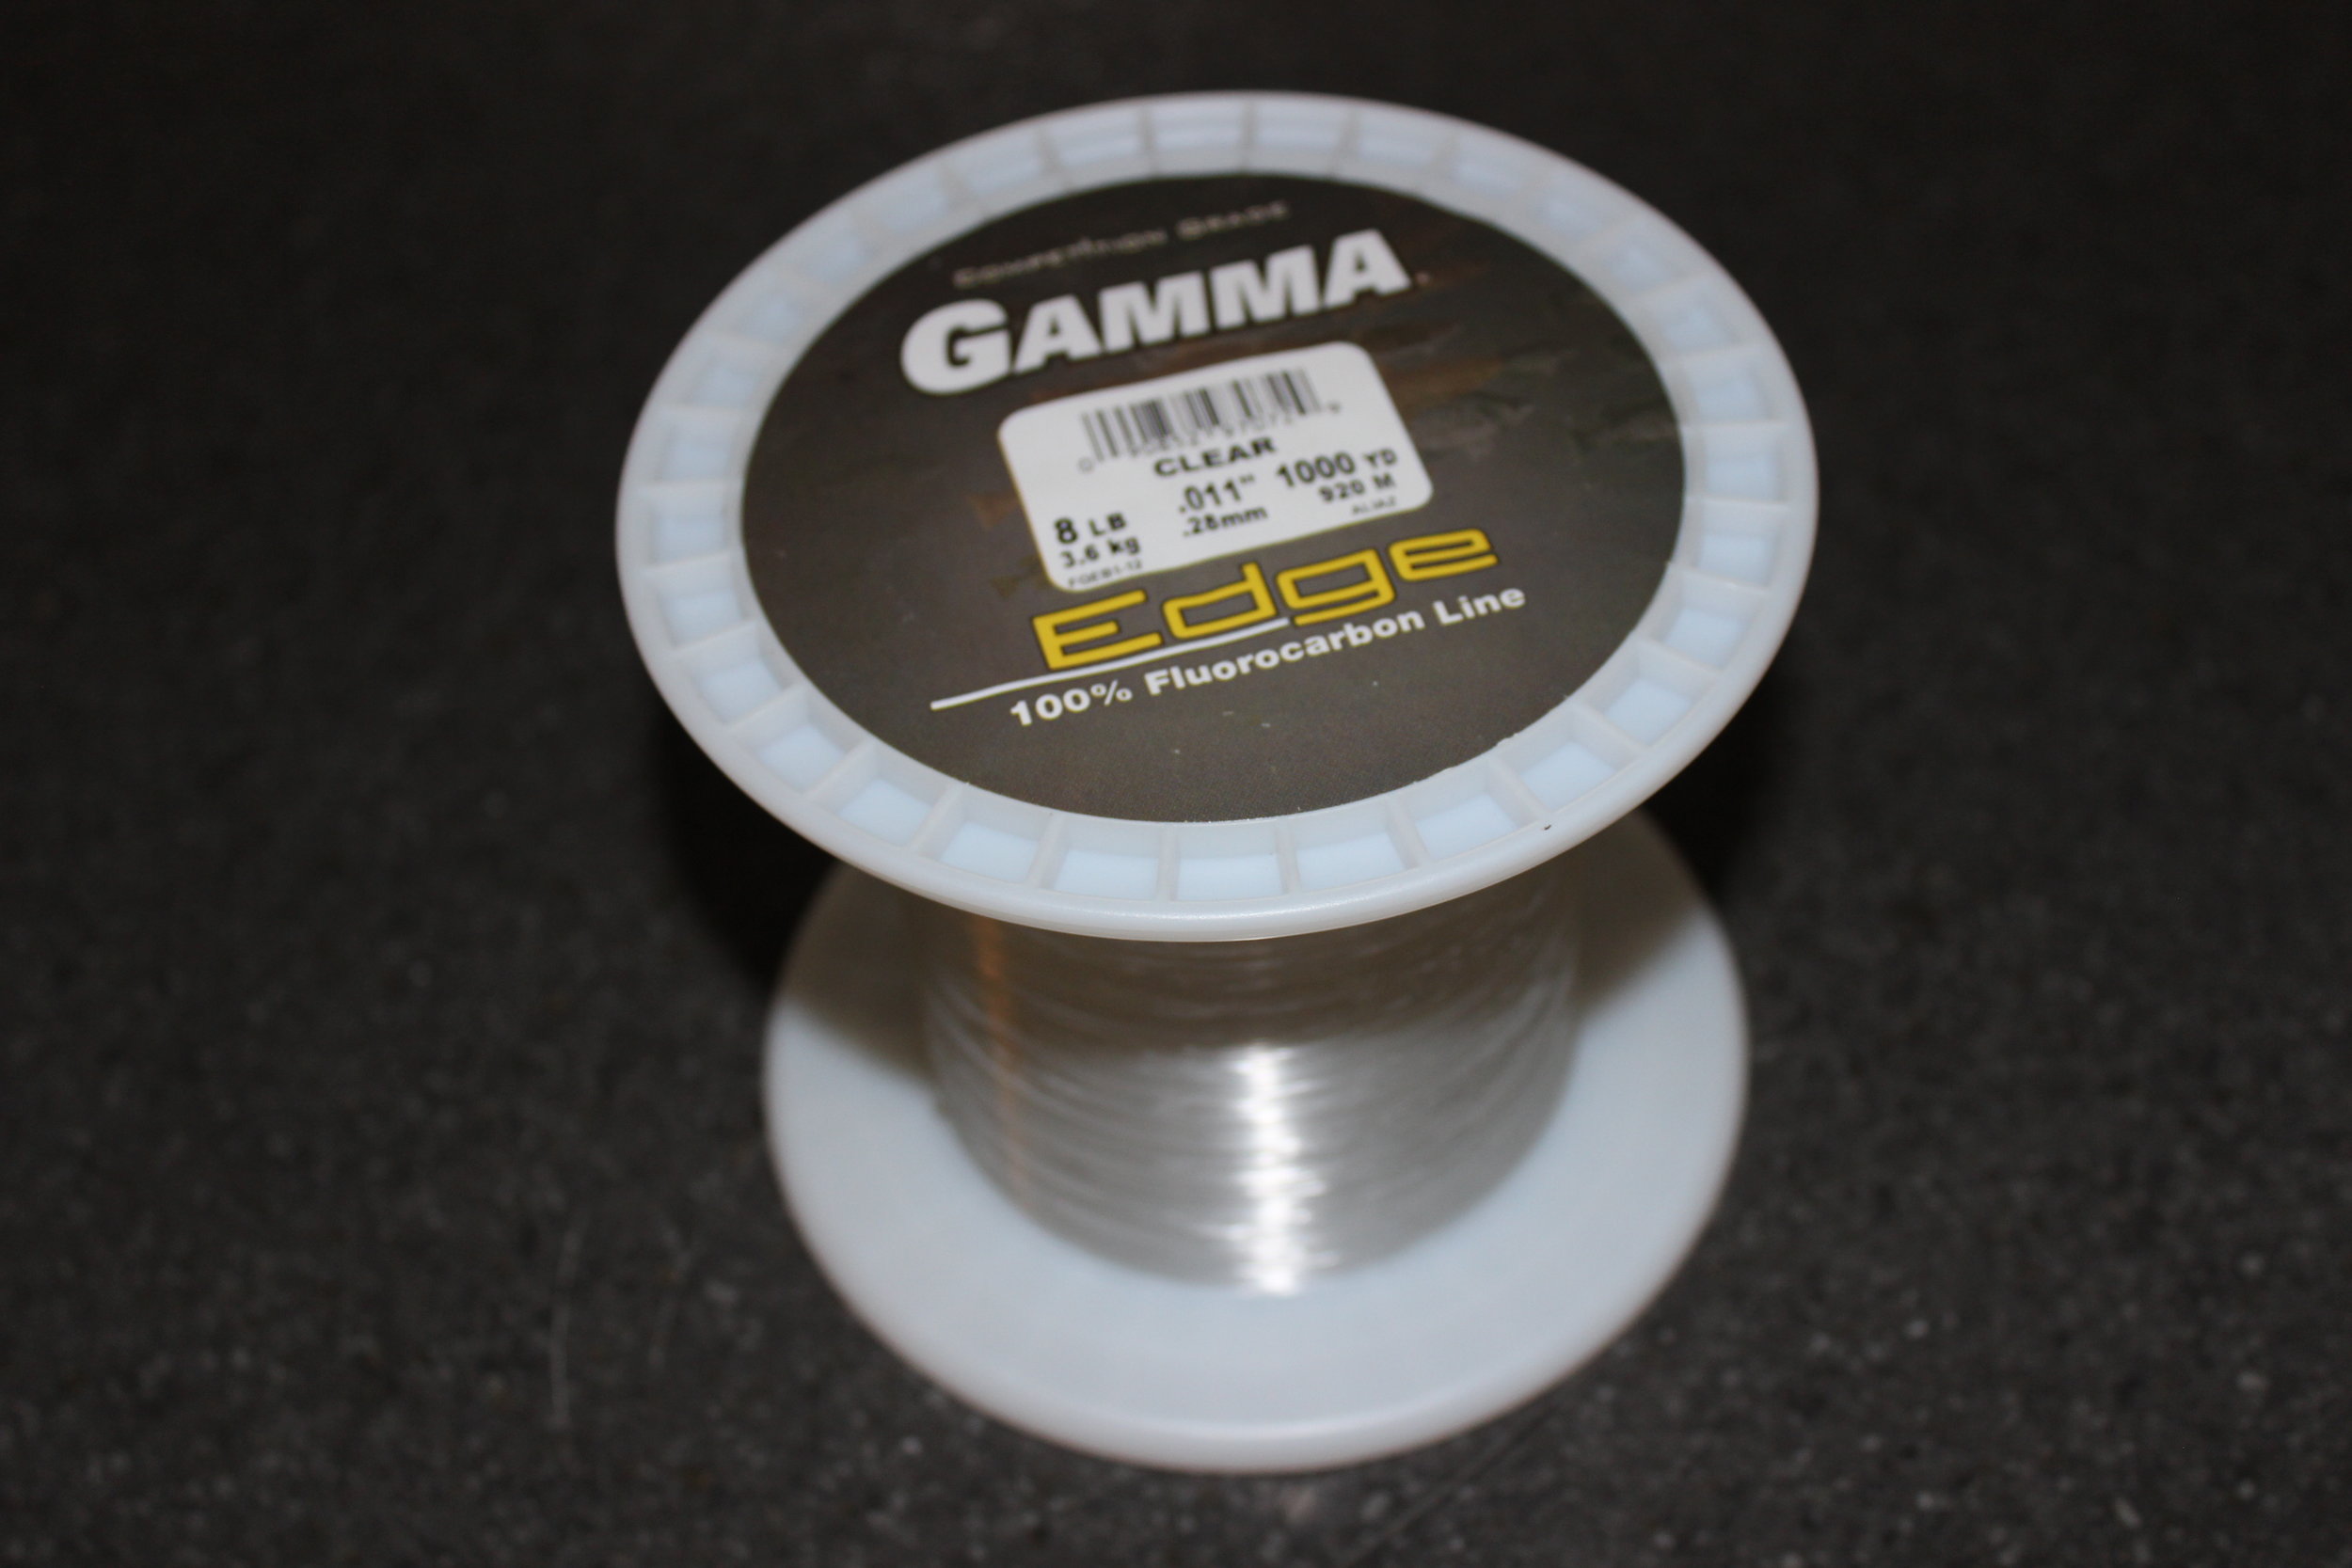 Summer 2016 Product Review: Gamma Edge, Torque, and CoPolymer line